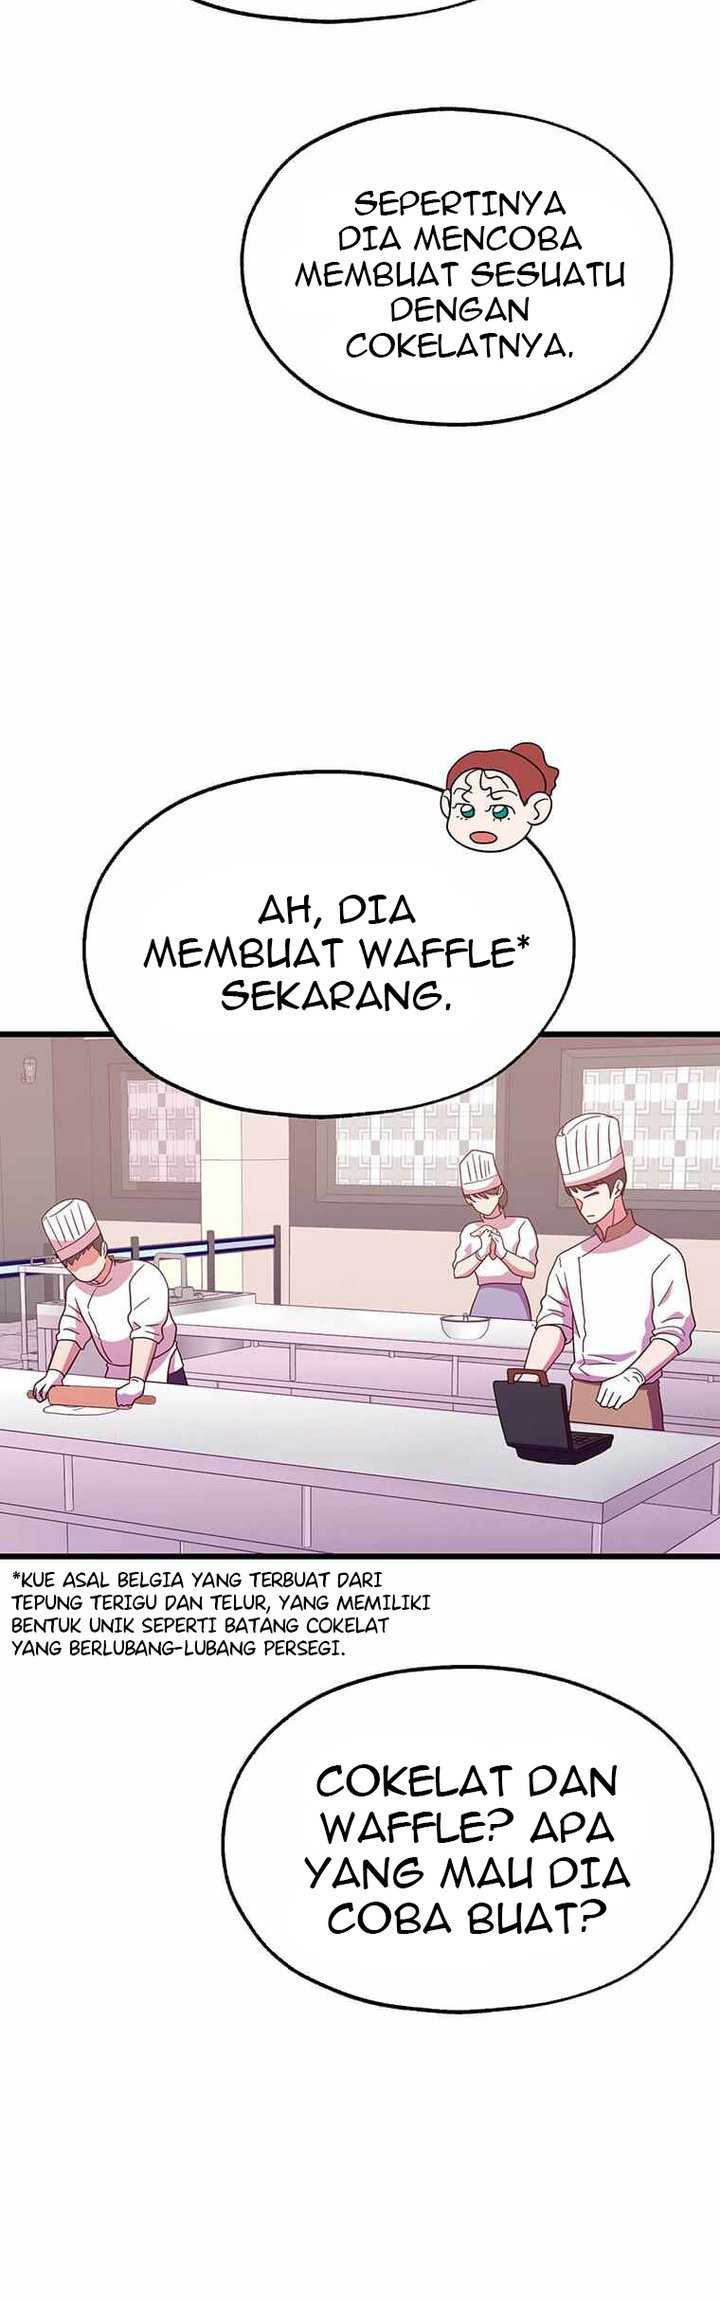 The World Greatest Bakery Chapter 31